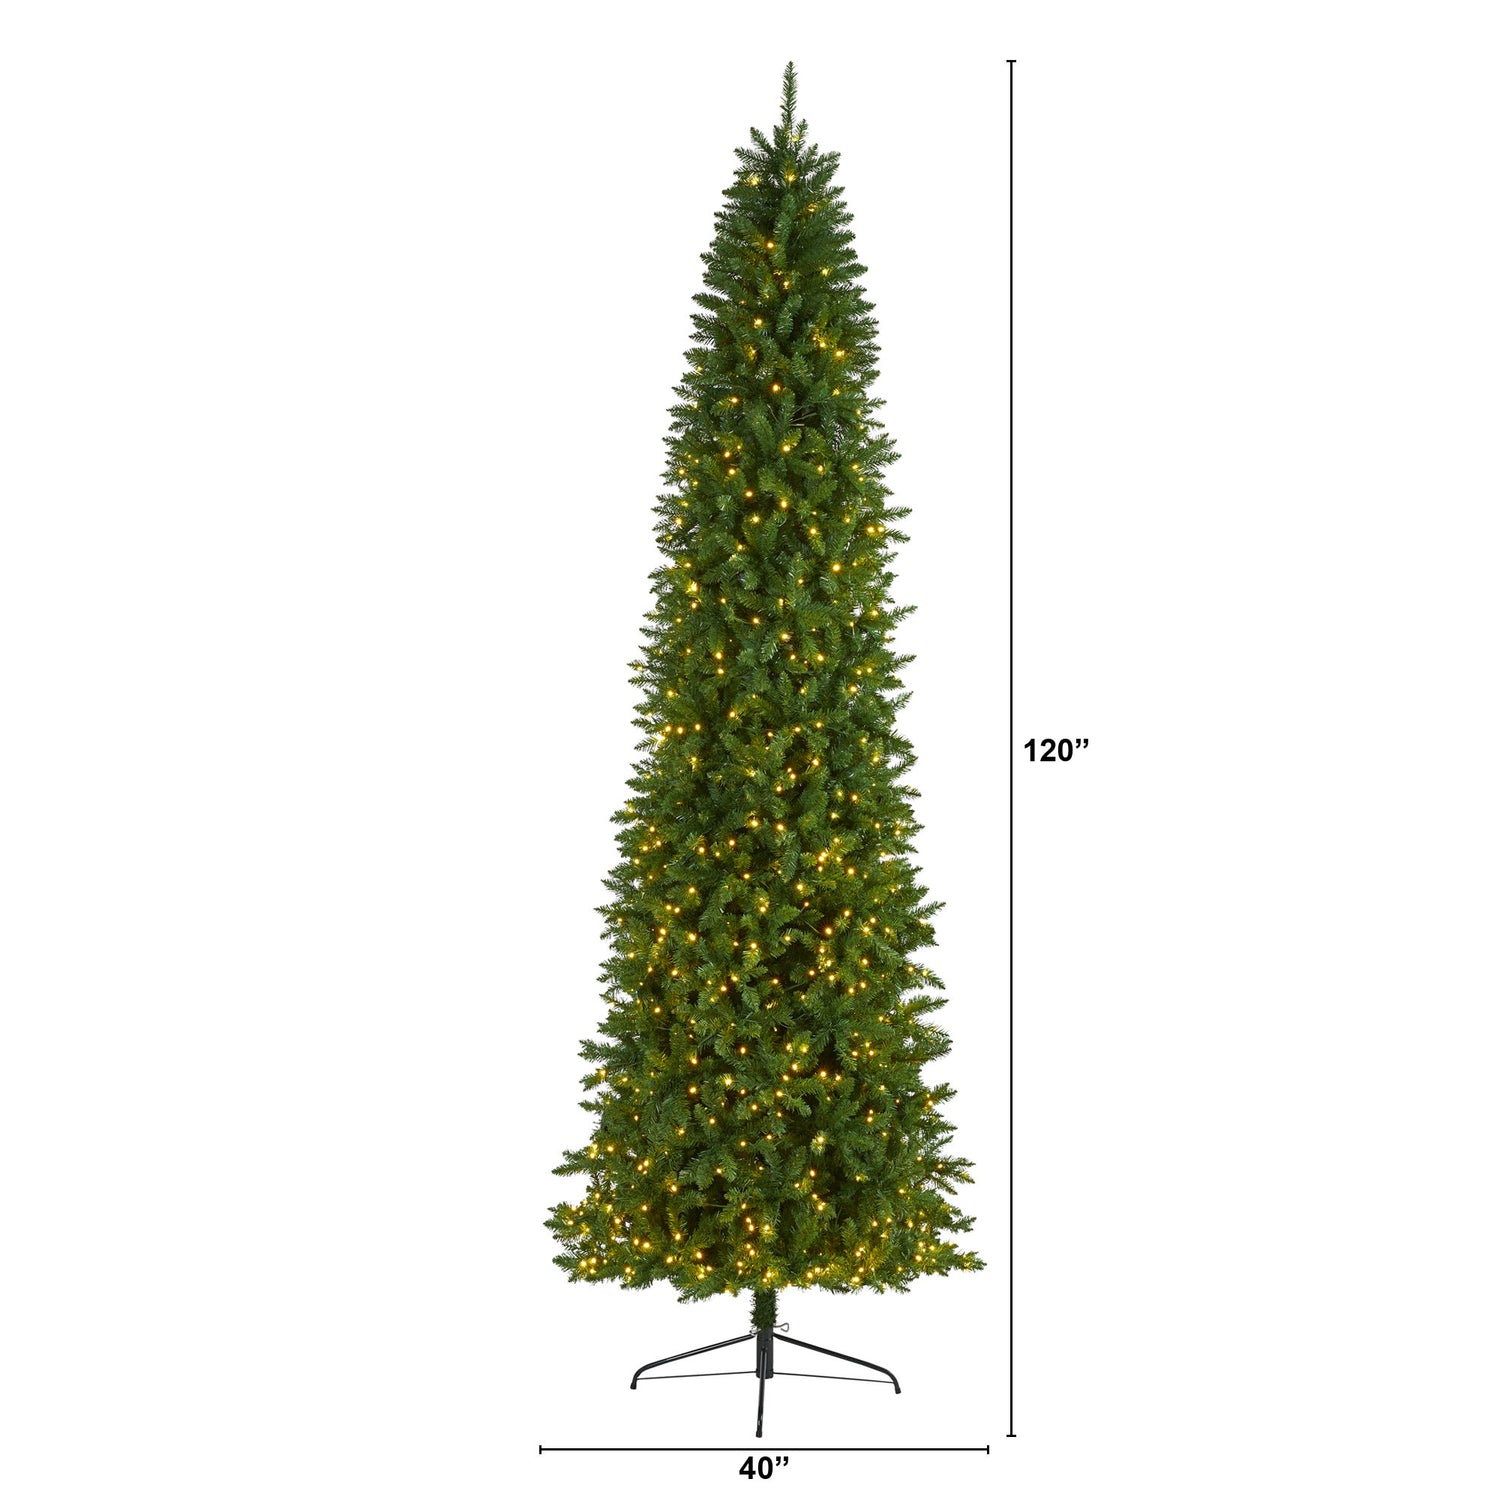 10’ Slim Green Mountain Pine Artificial Christmas Tree with 800 Clear LED Lights